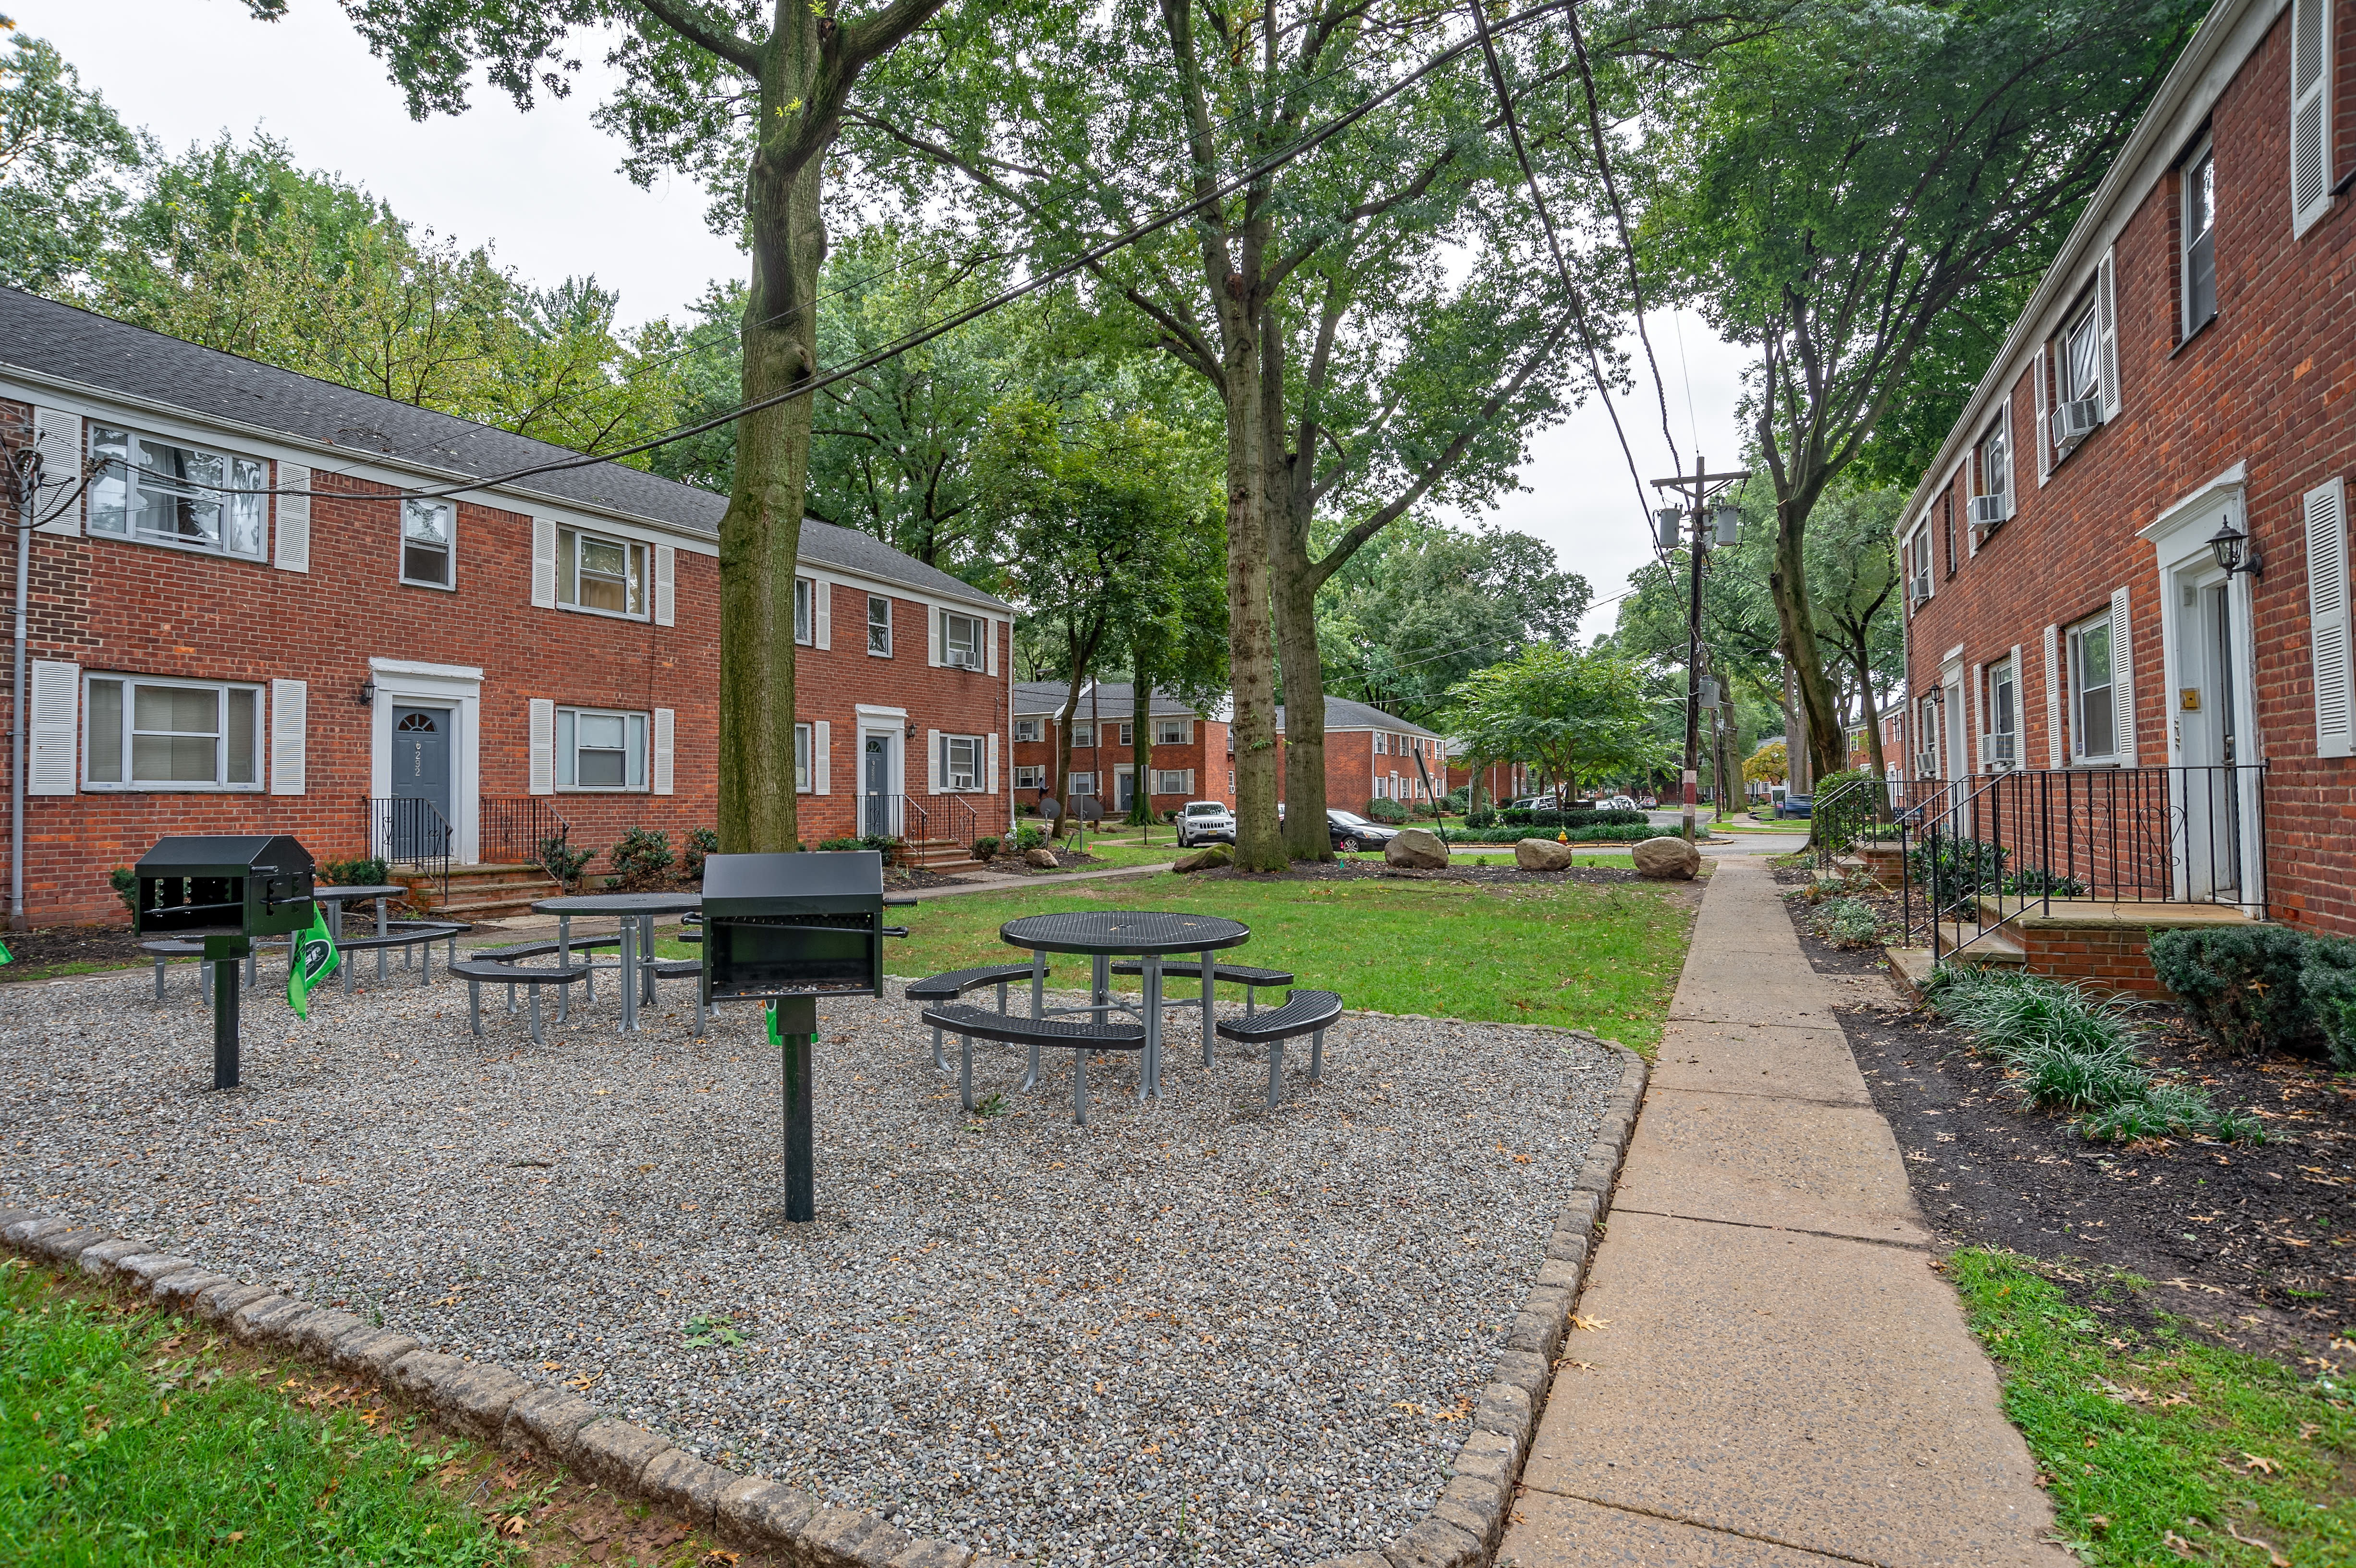 Exterior view of the apartments at The Woodlands in Belleville, New Jersey